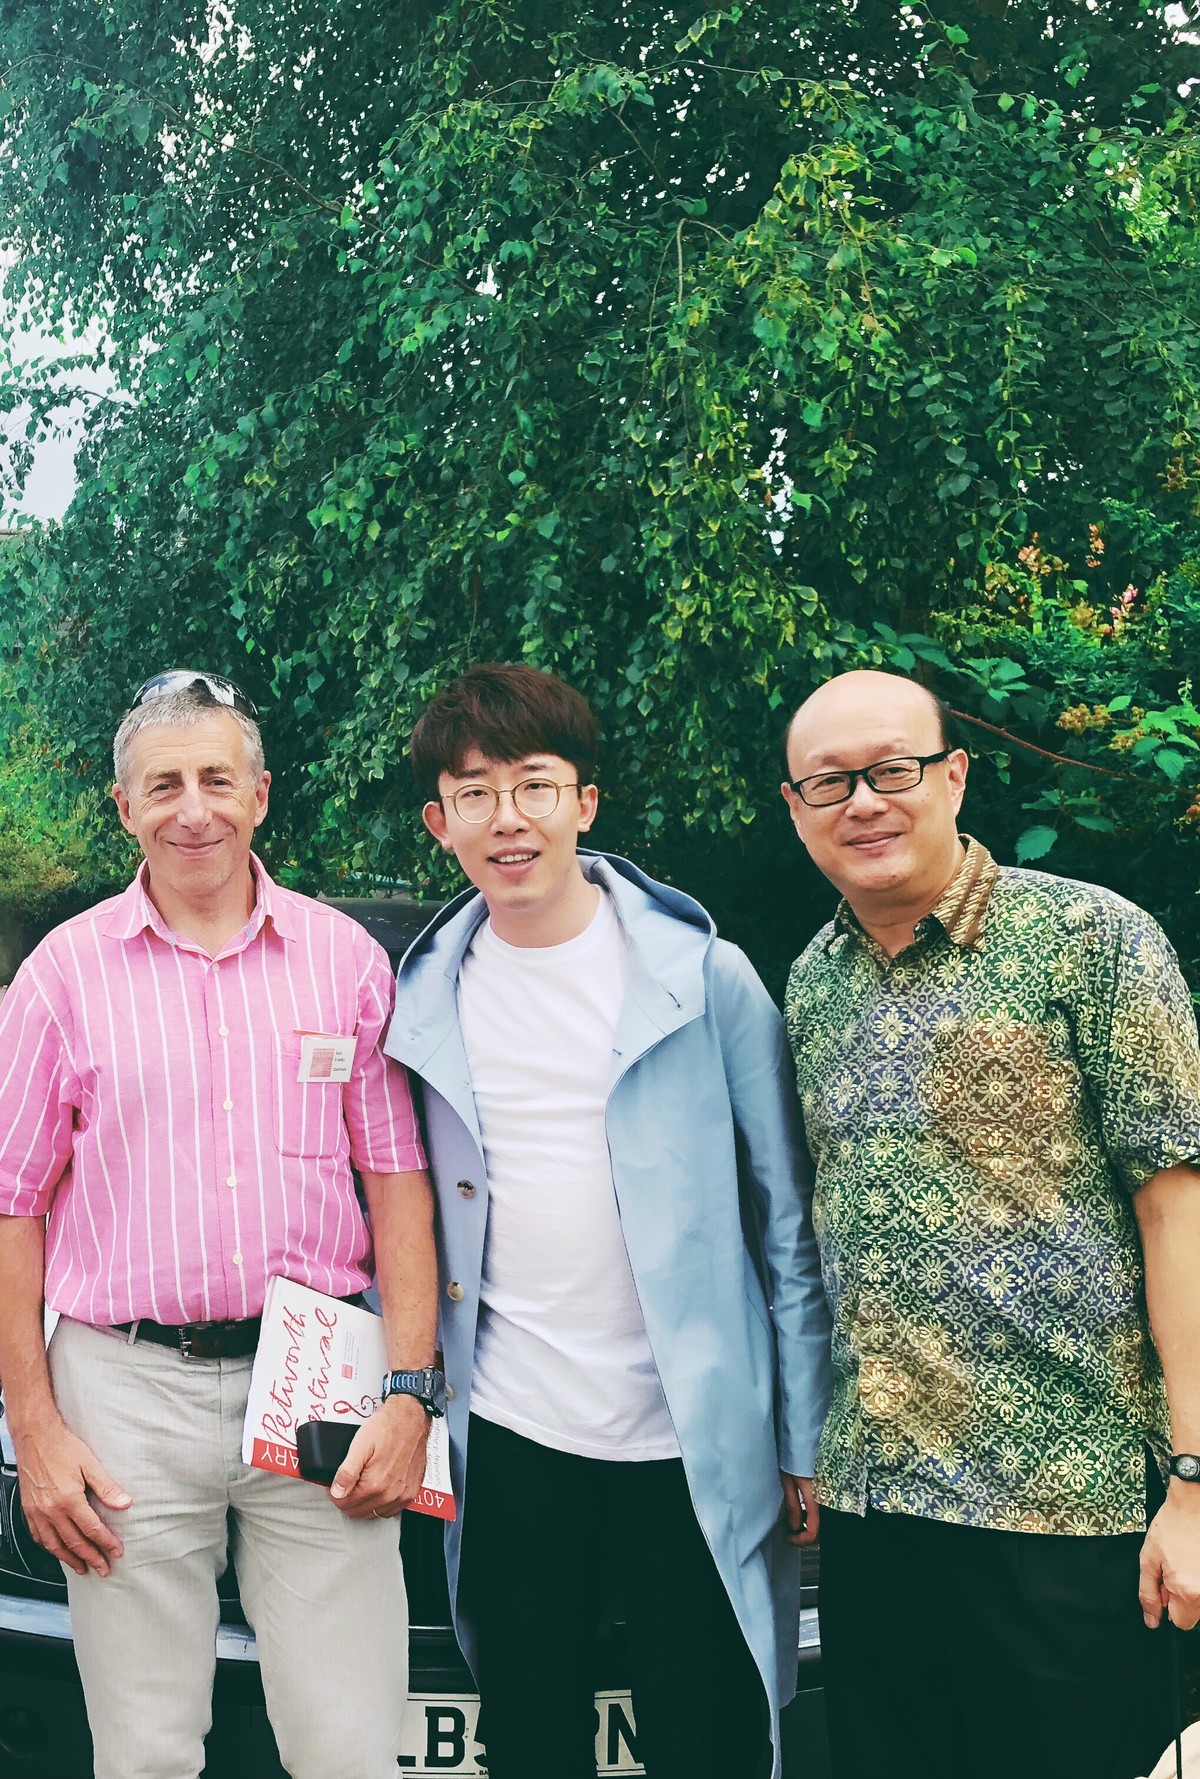 With Mr. Neil Franks, the Chairman of Petworth Festival and Dr. Chang Tou Liang